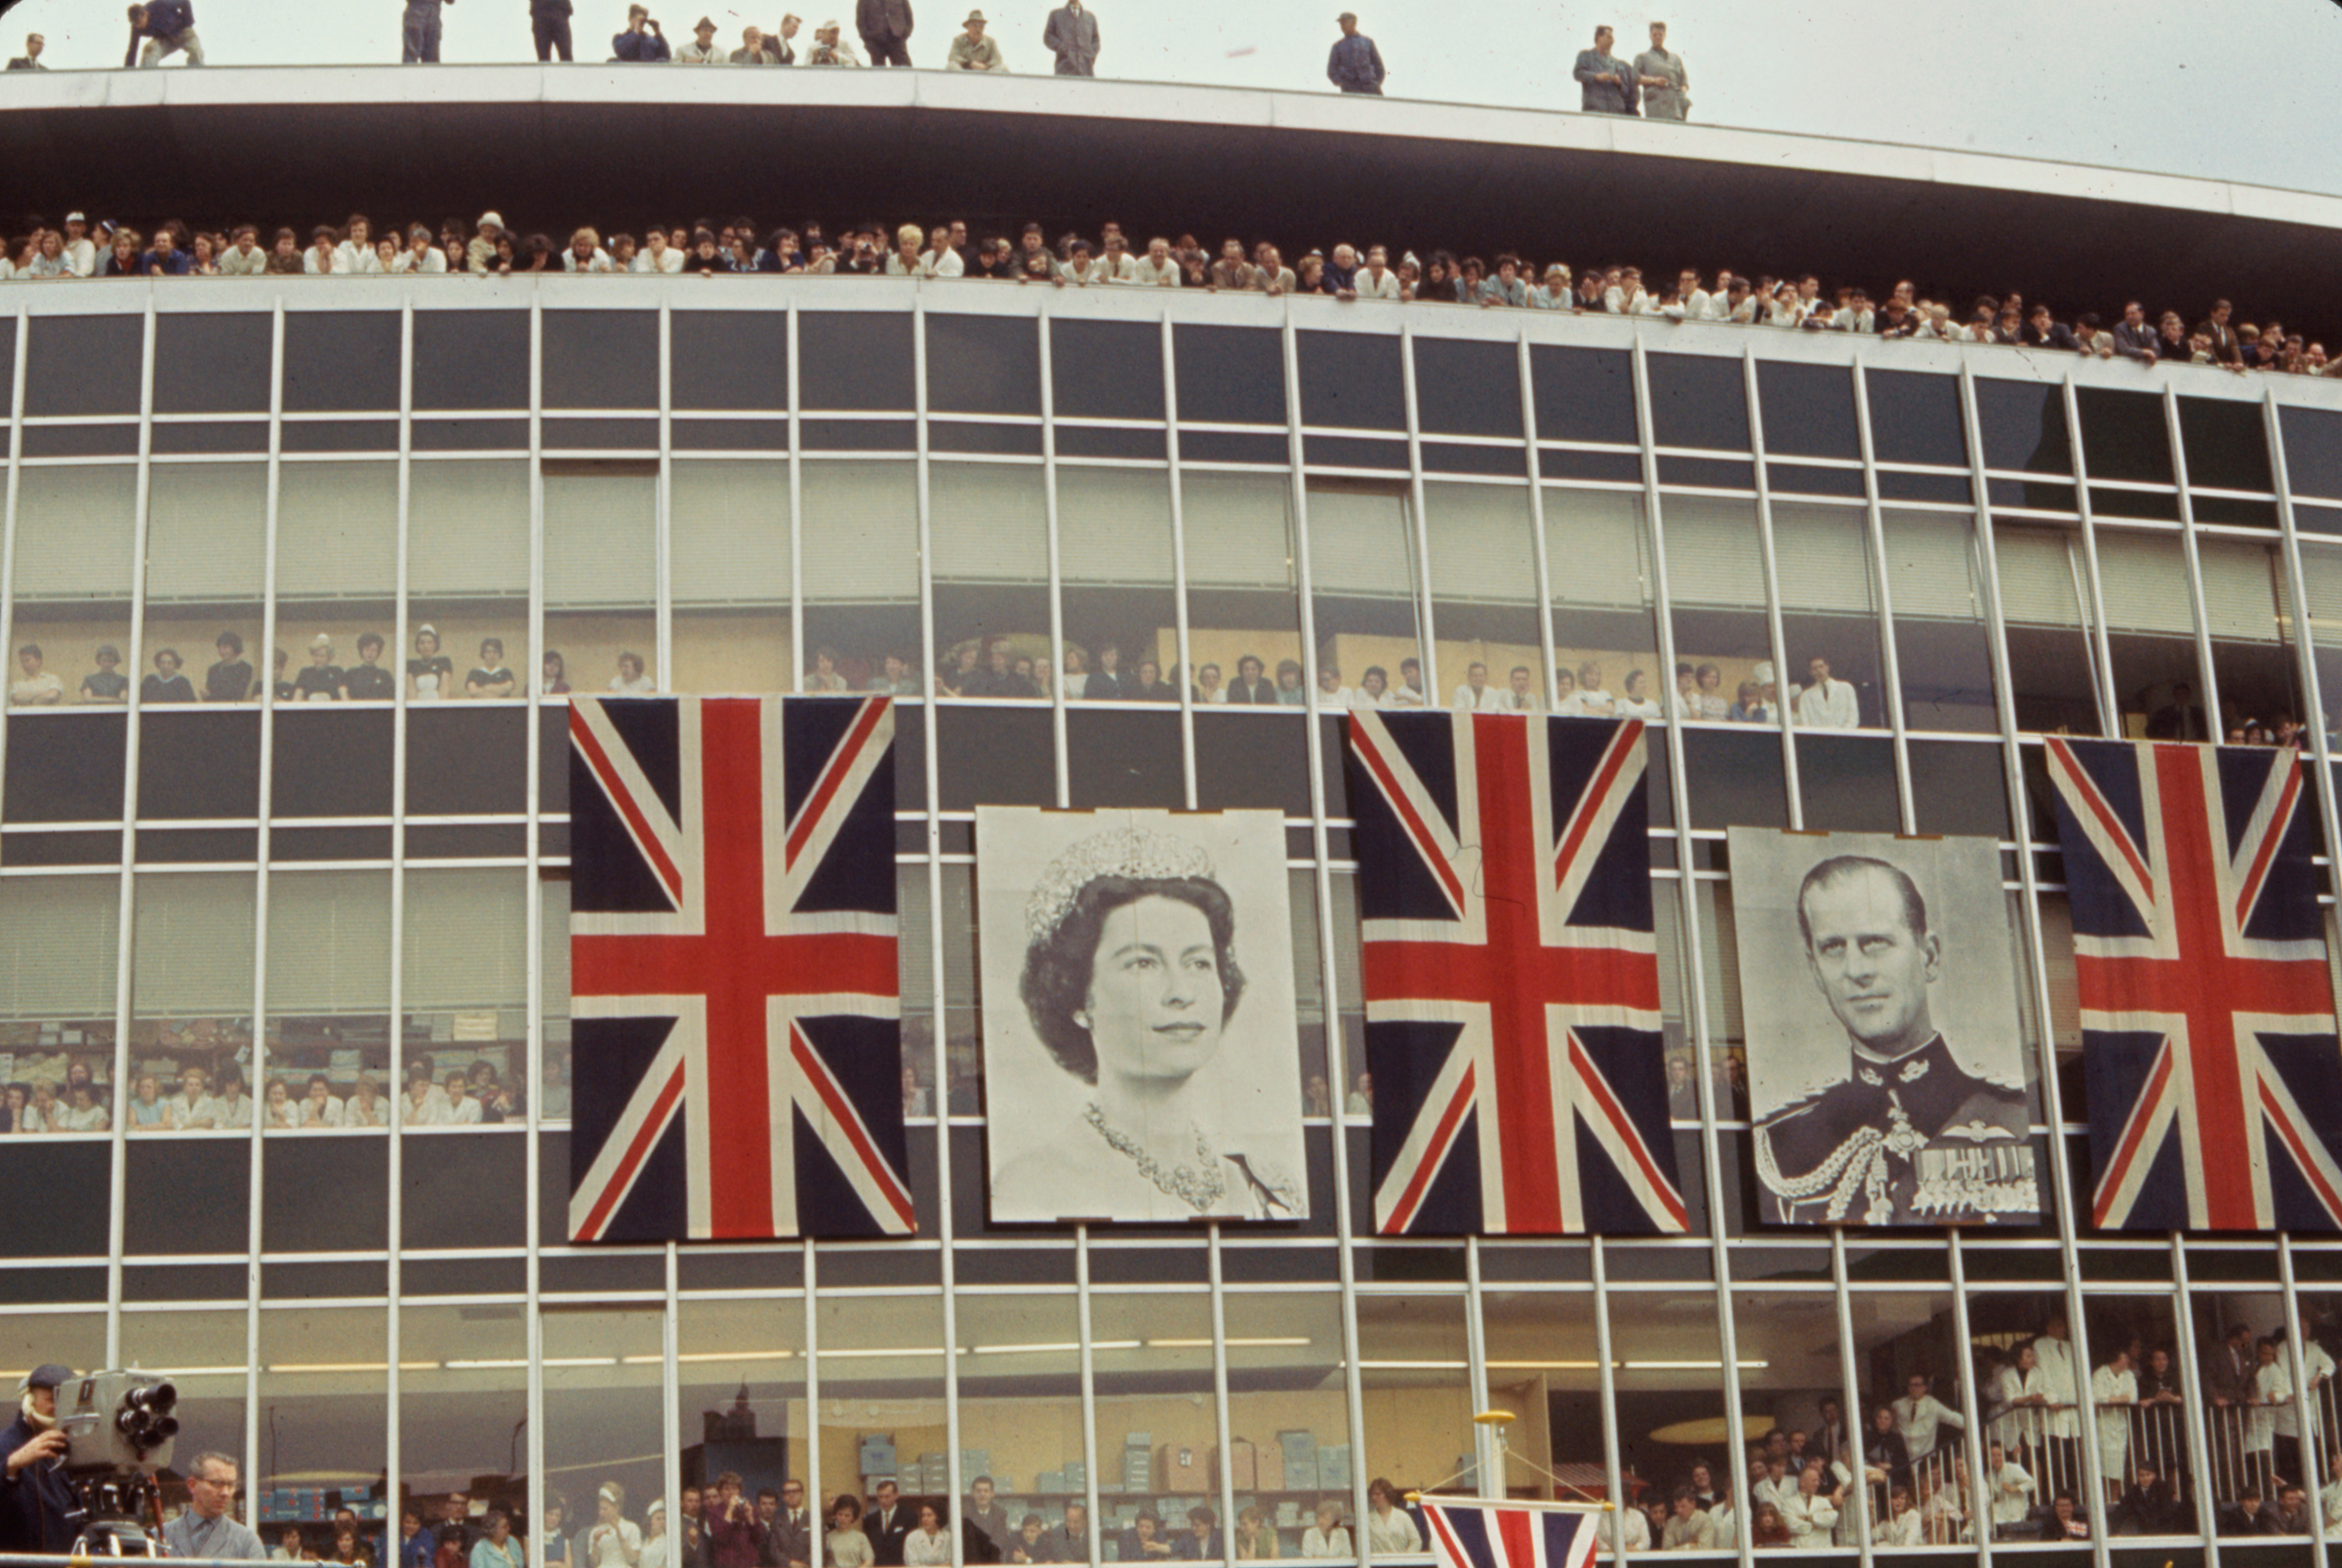 Crowds peer out windows and balconies to catch a glimpse of Queen Elizabeth II and Prince Philip, Bonn, Germany, May 1965.